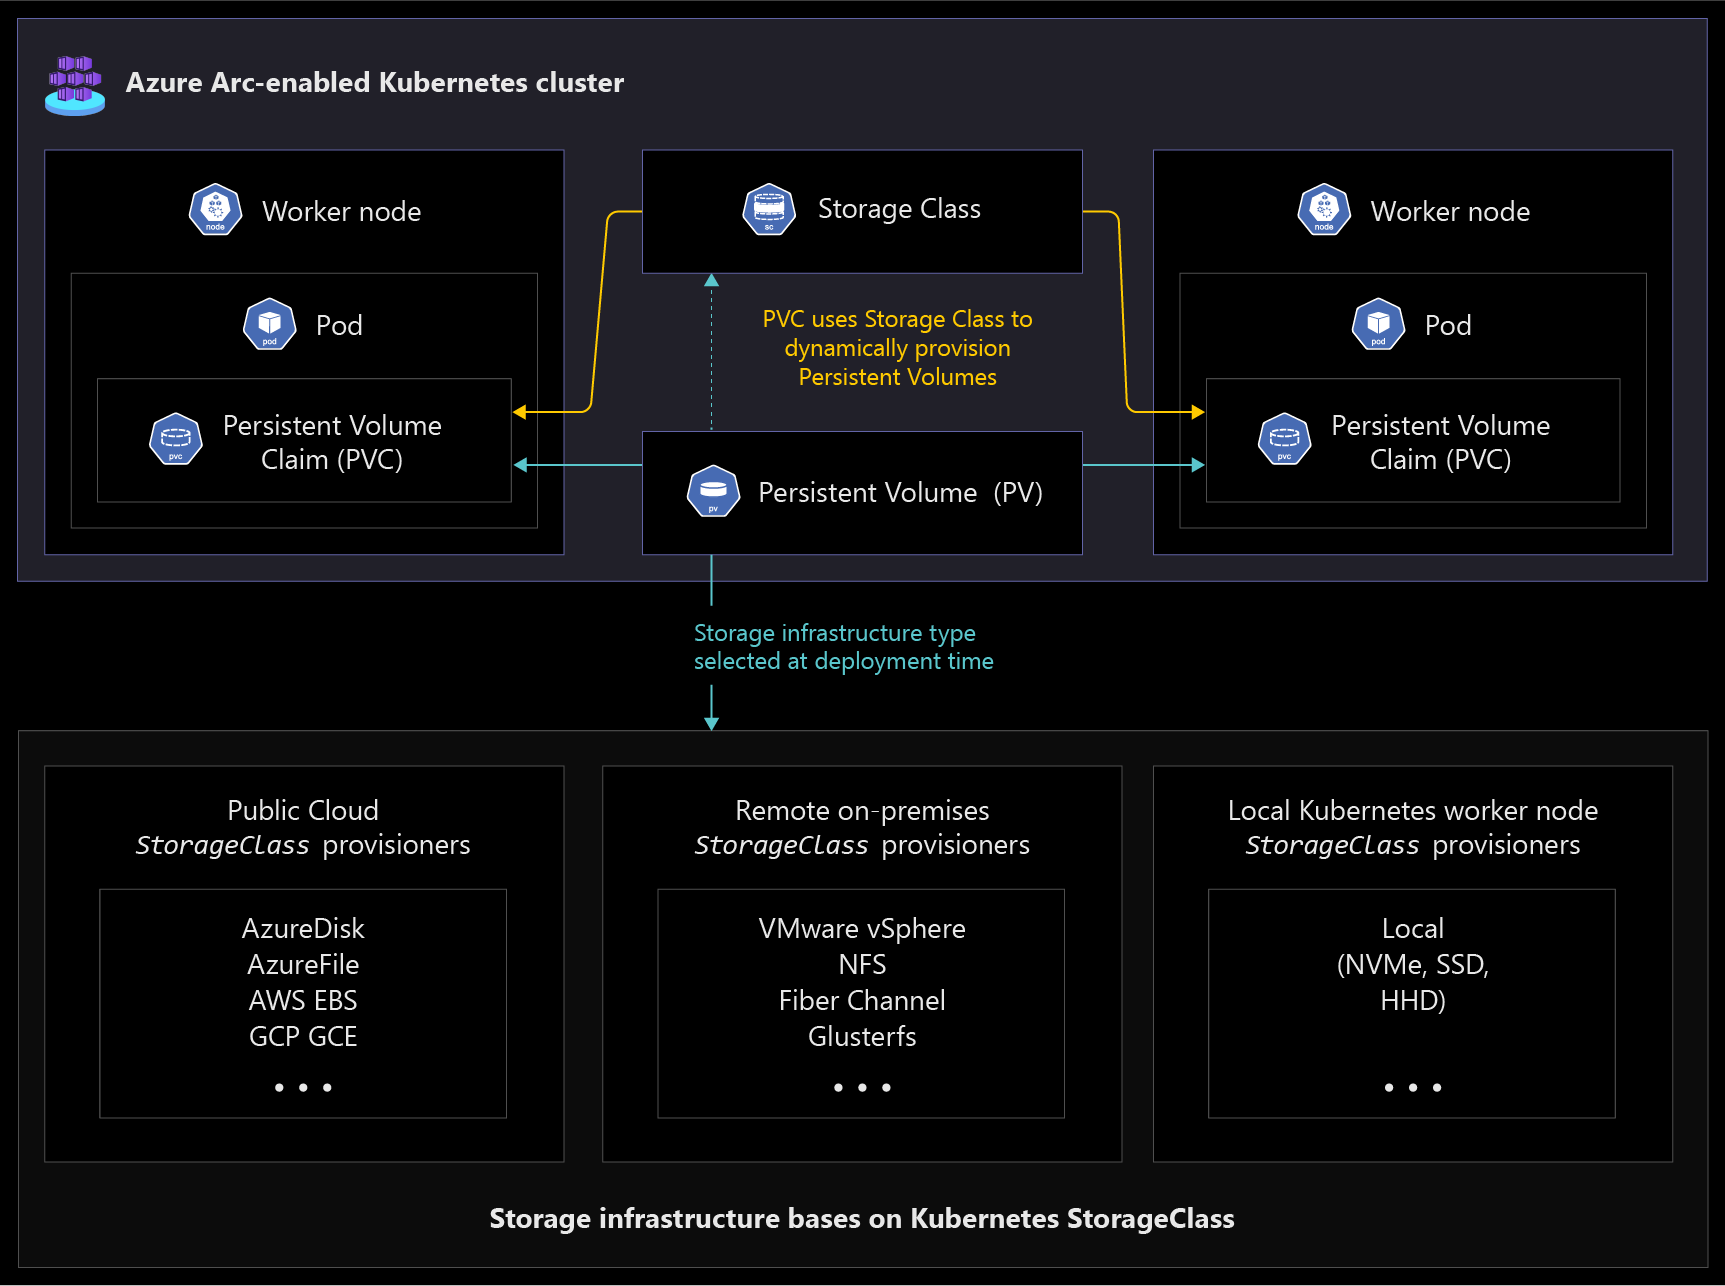 A screenshot showing Kubernetes storage concepts with the storage classes options.